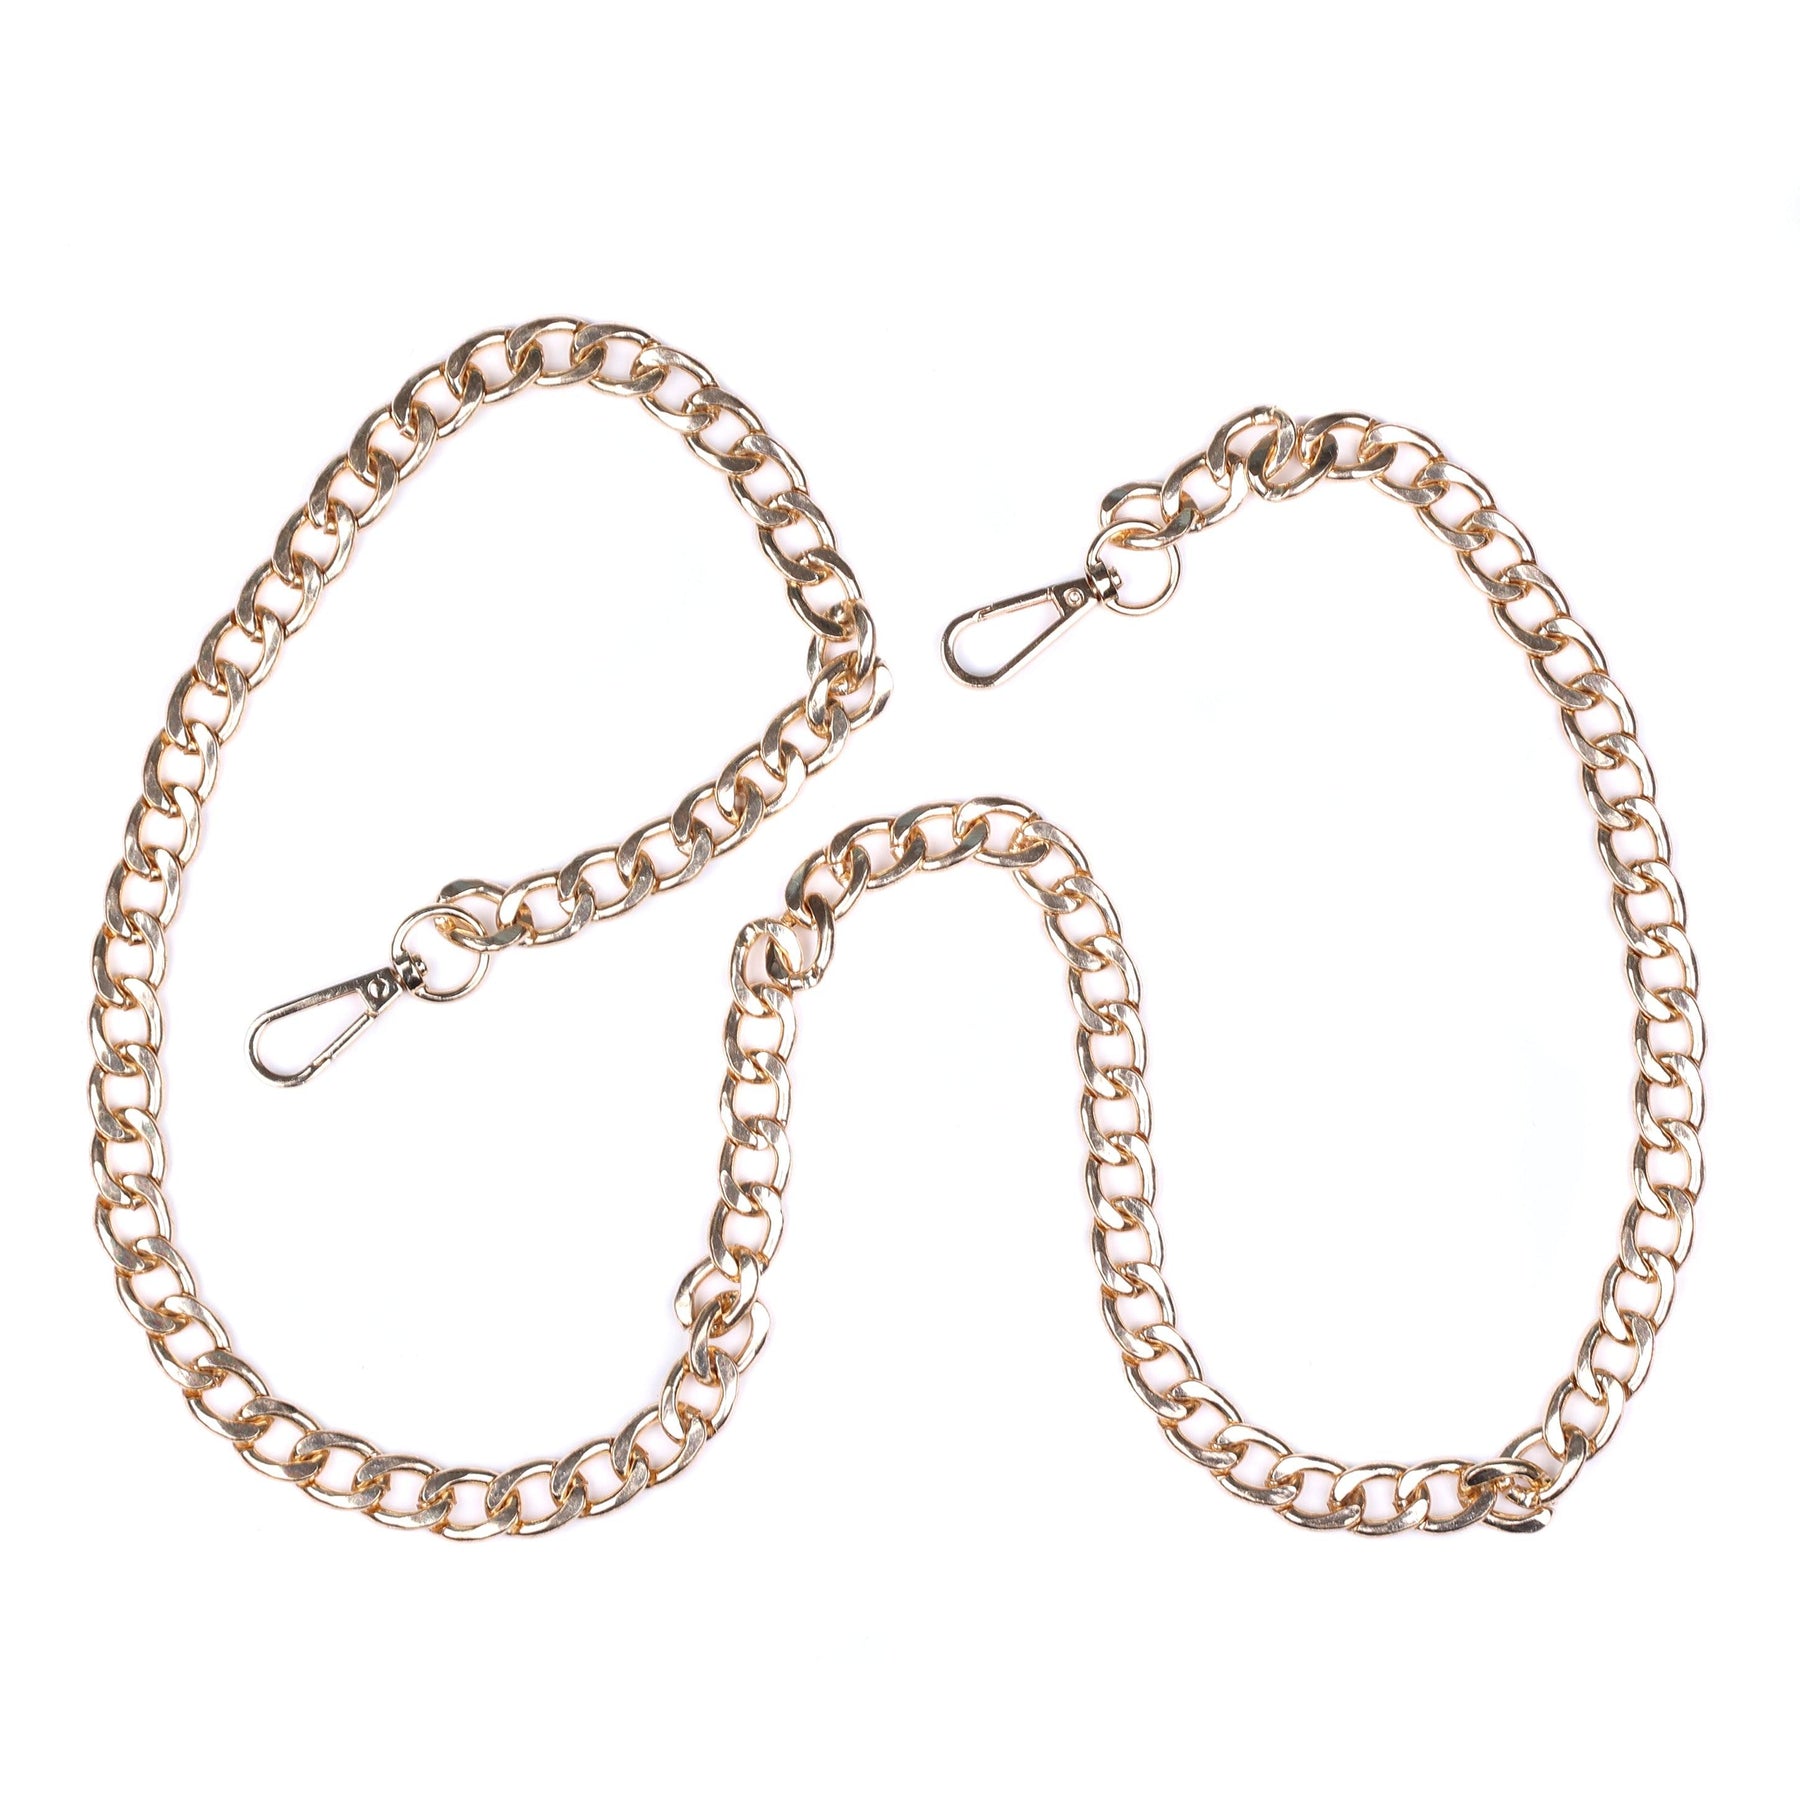 Luxury Crossbody Strap Oval Chain Gold or Silver for Your 